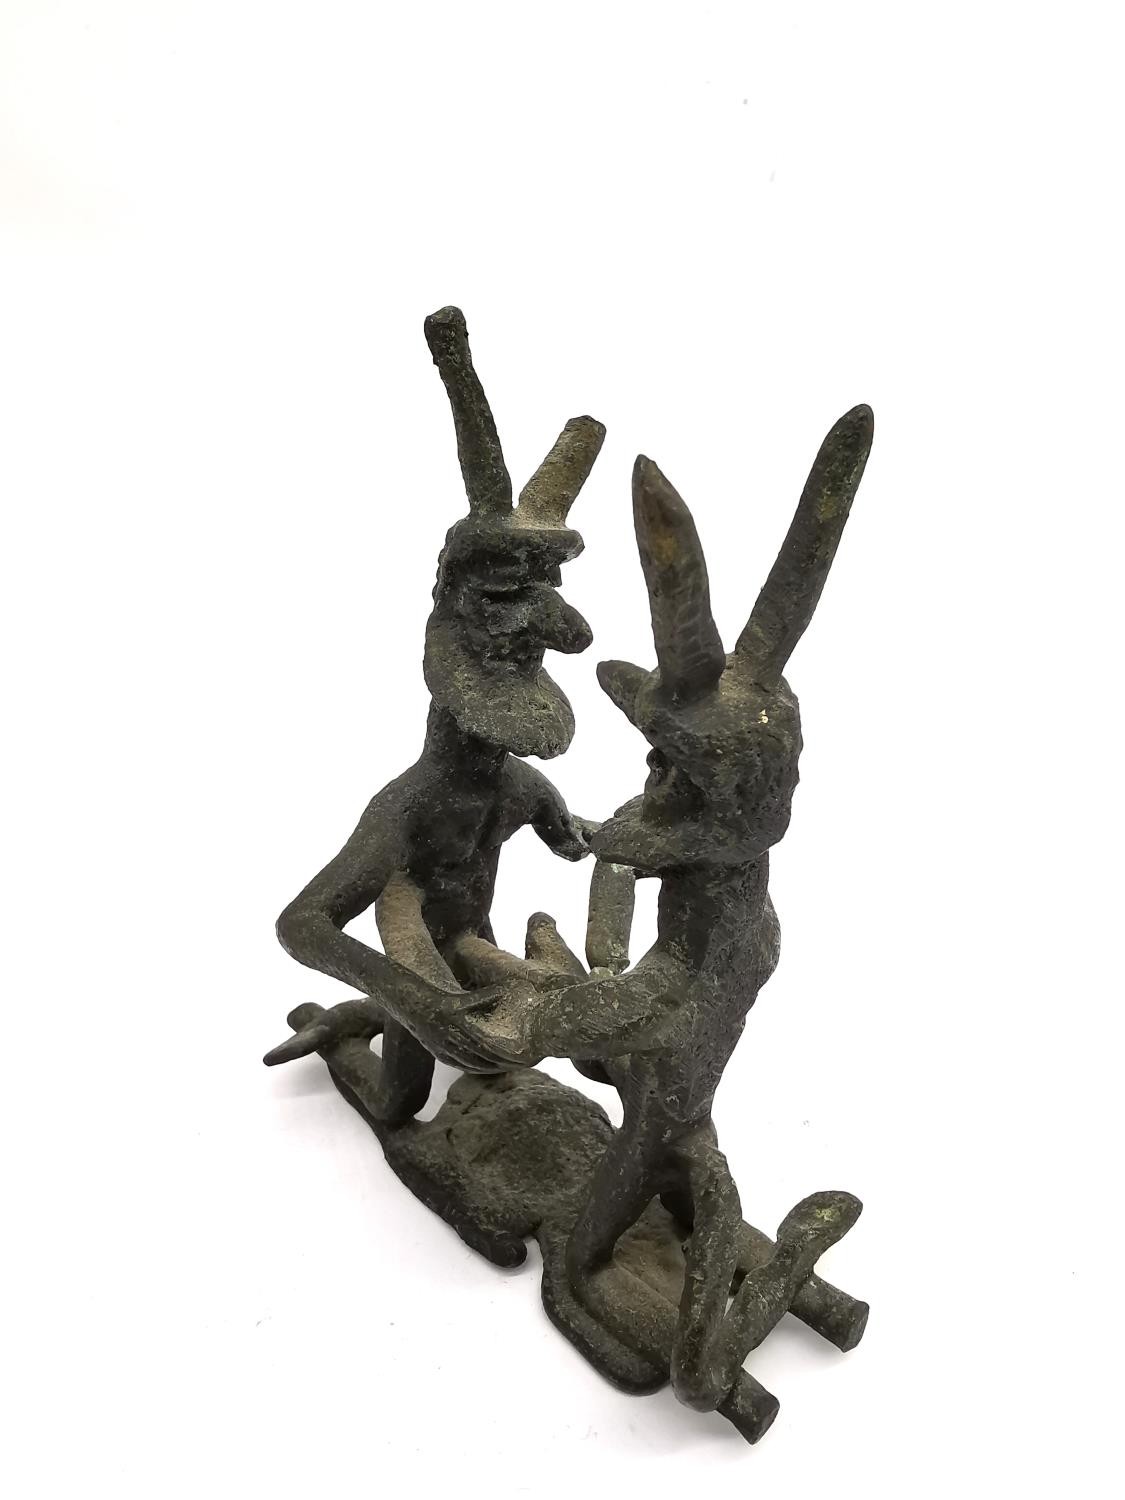 A Tribal bronze erotic sculpture of two bearded mythical creatures fighting. H.12 L.10.5 W.7cm. - Bild 4 aus 7